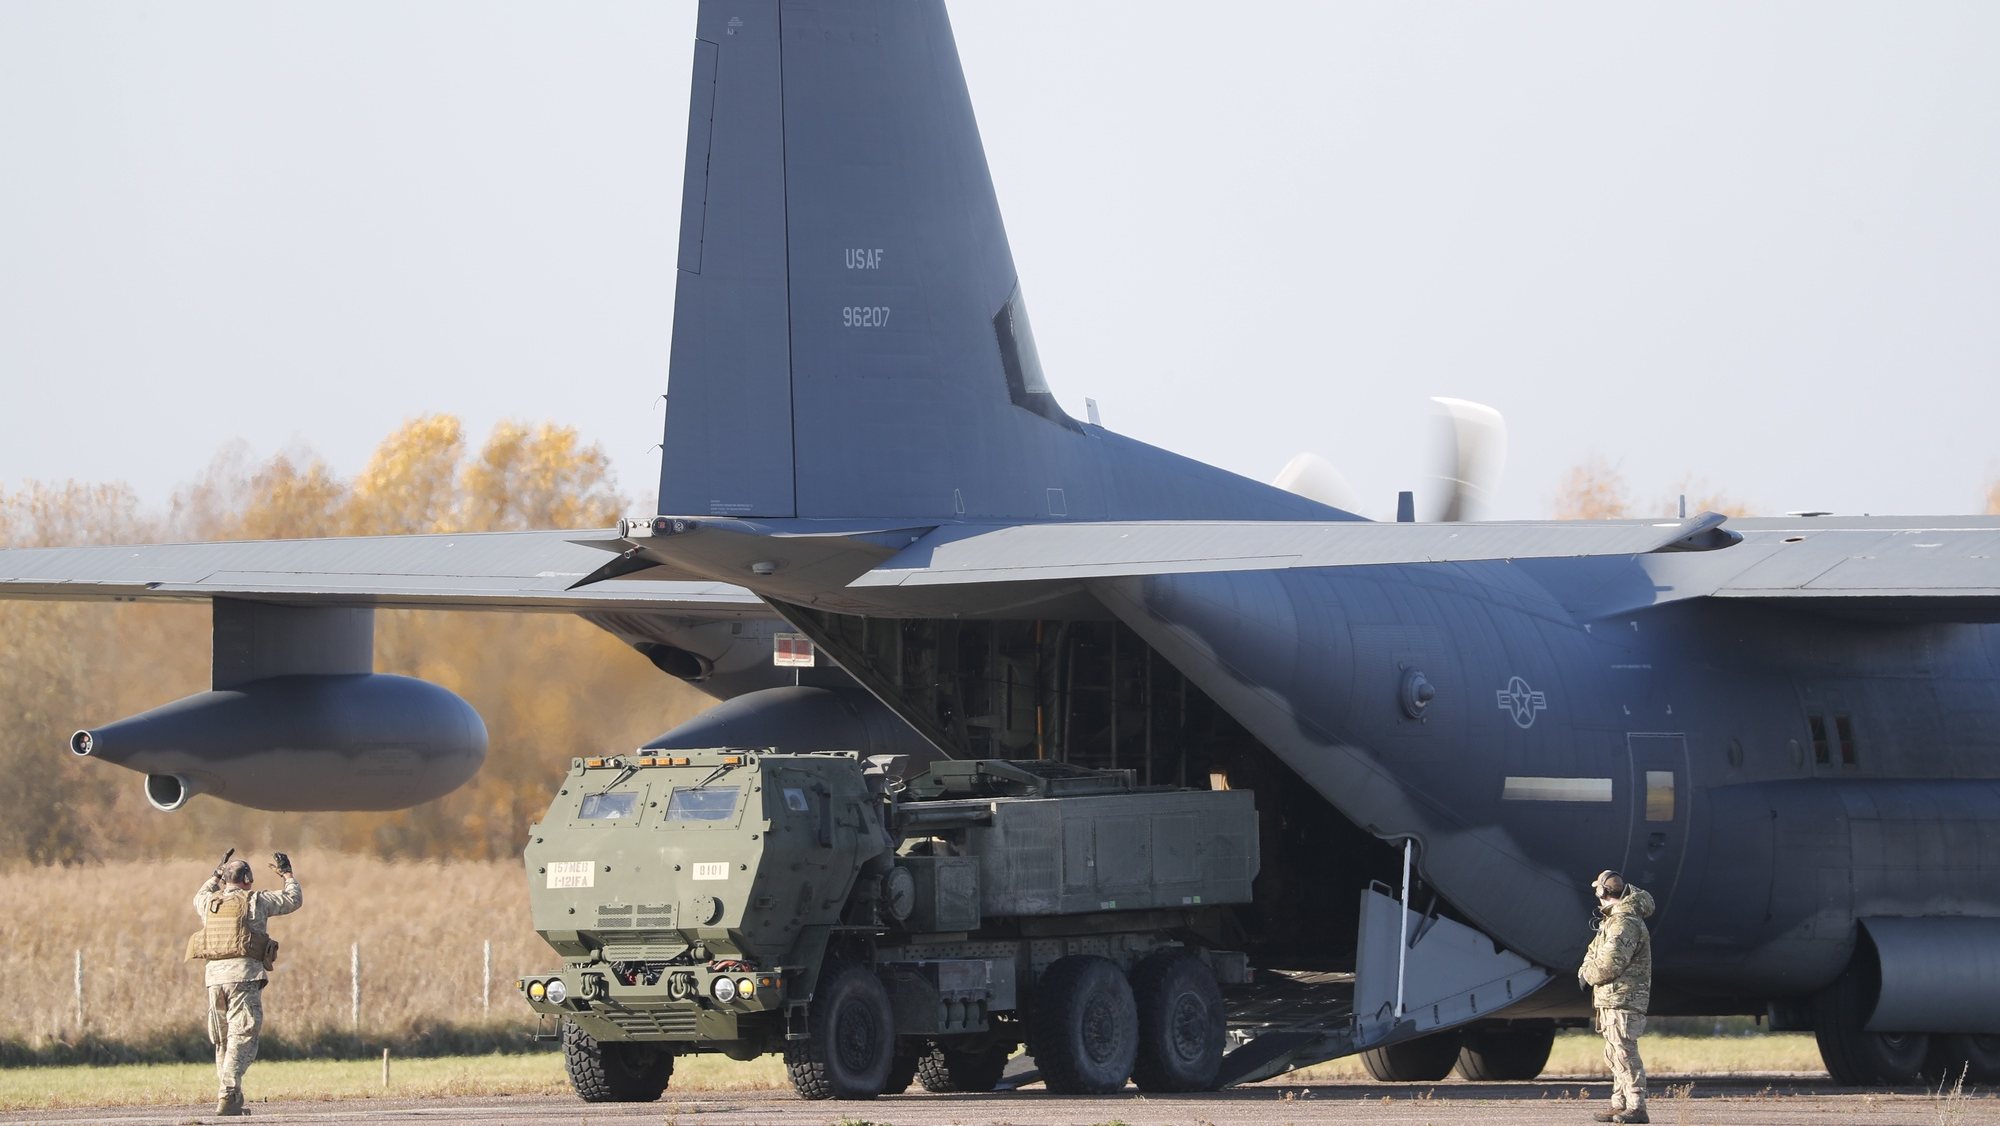 epa09545435 A US Army High Mobility Artillery Rocket System (HIMARS) comes out of the US Air Force special operation aircraft MC-130J Commando II (R) during a landing exercise at Spilva airfield in Riga, Latvia, 25 October 2021. The US Air Force special operation aircraft MC-130J Commando II took part in a landing exercise demonstrating the rapid delivery and deployment of US Army High Mobility Artillery Rocket System (HIMARS). The aim of the exercise is to demonstrate the collective defense capabilities and the ability of the Allies to quickly deliver fire support capabilities to Latvia, providing support to the National Armed Forces in national defense.  EPA/TOMS KALNINS